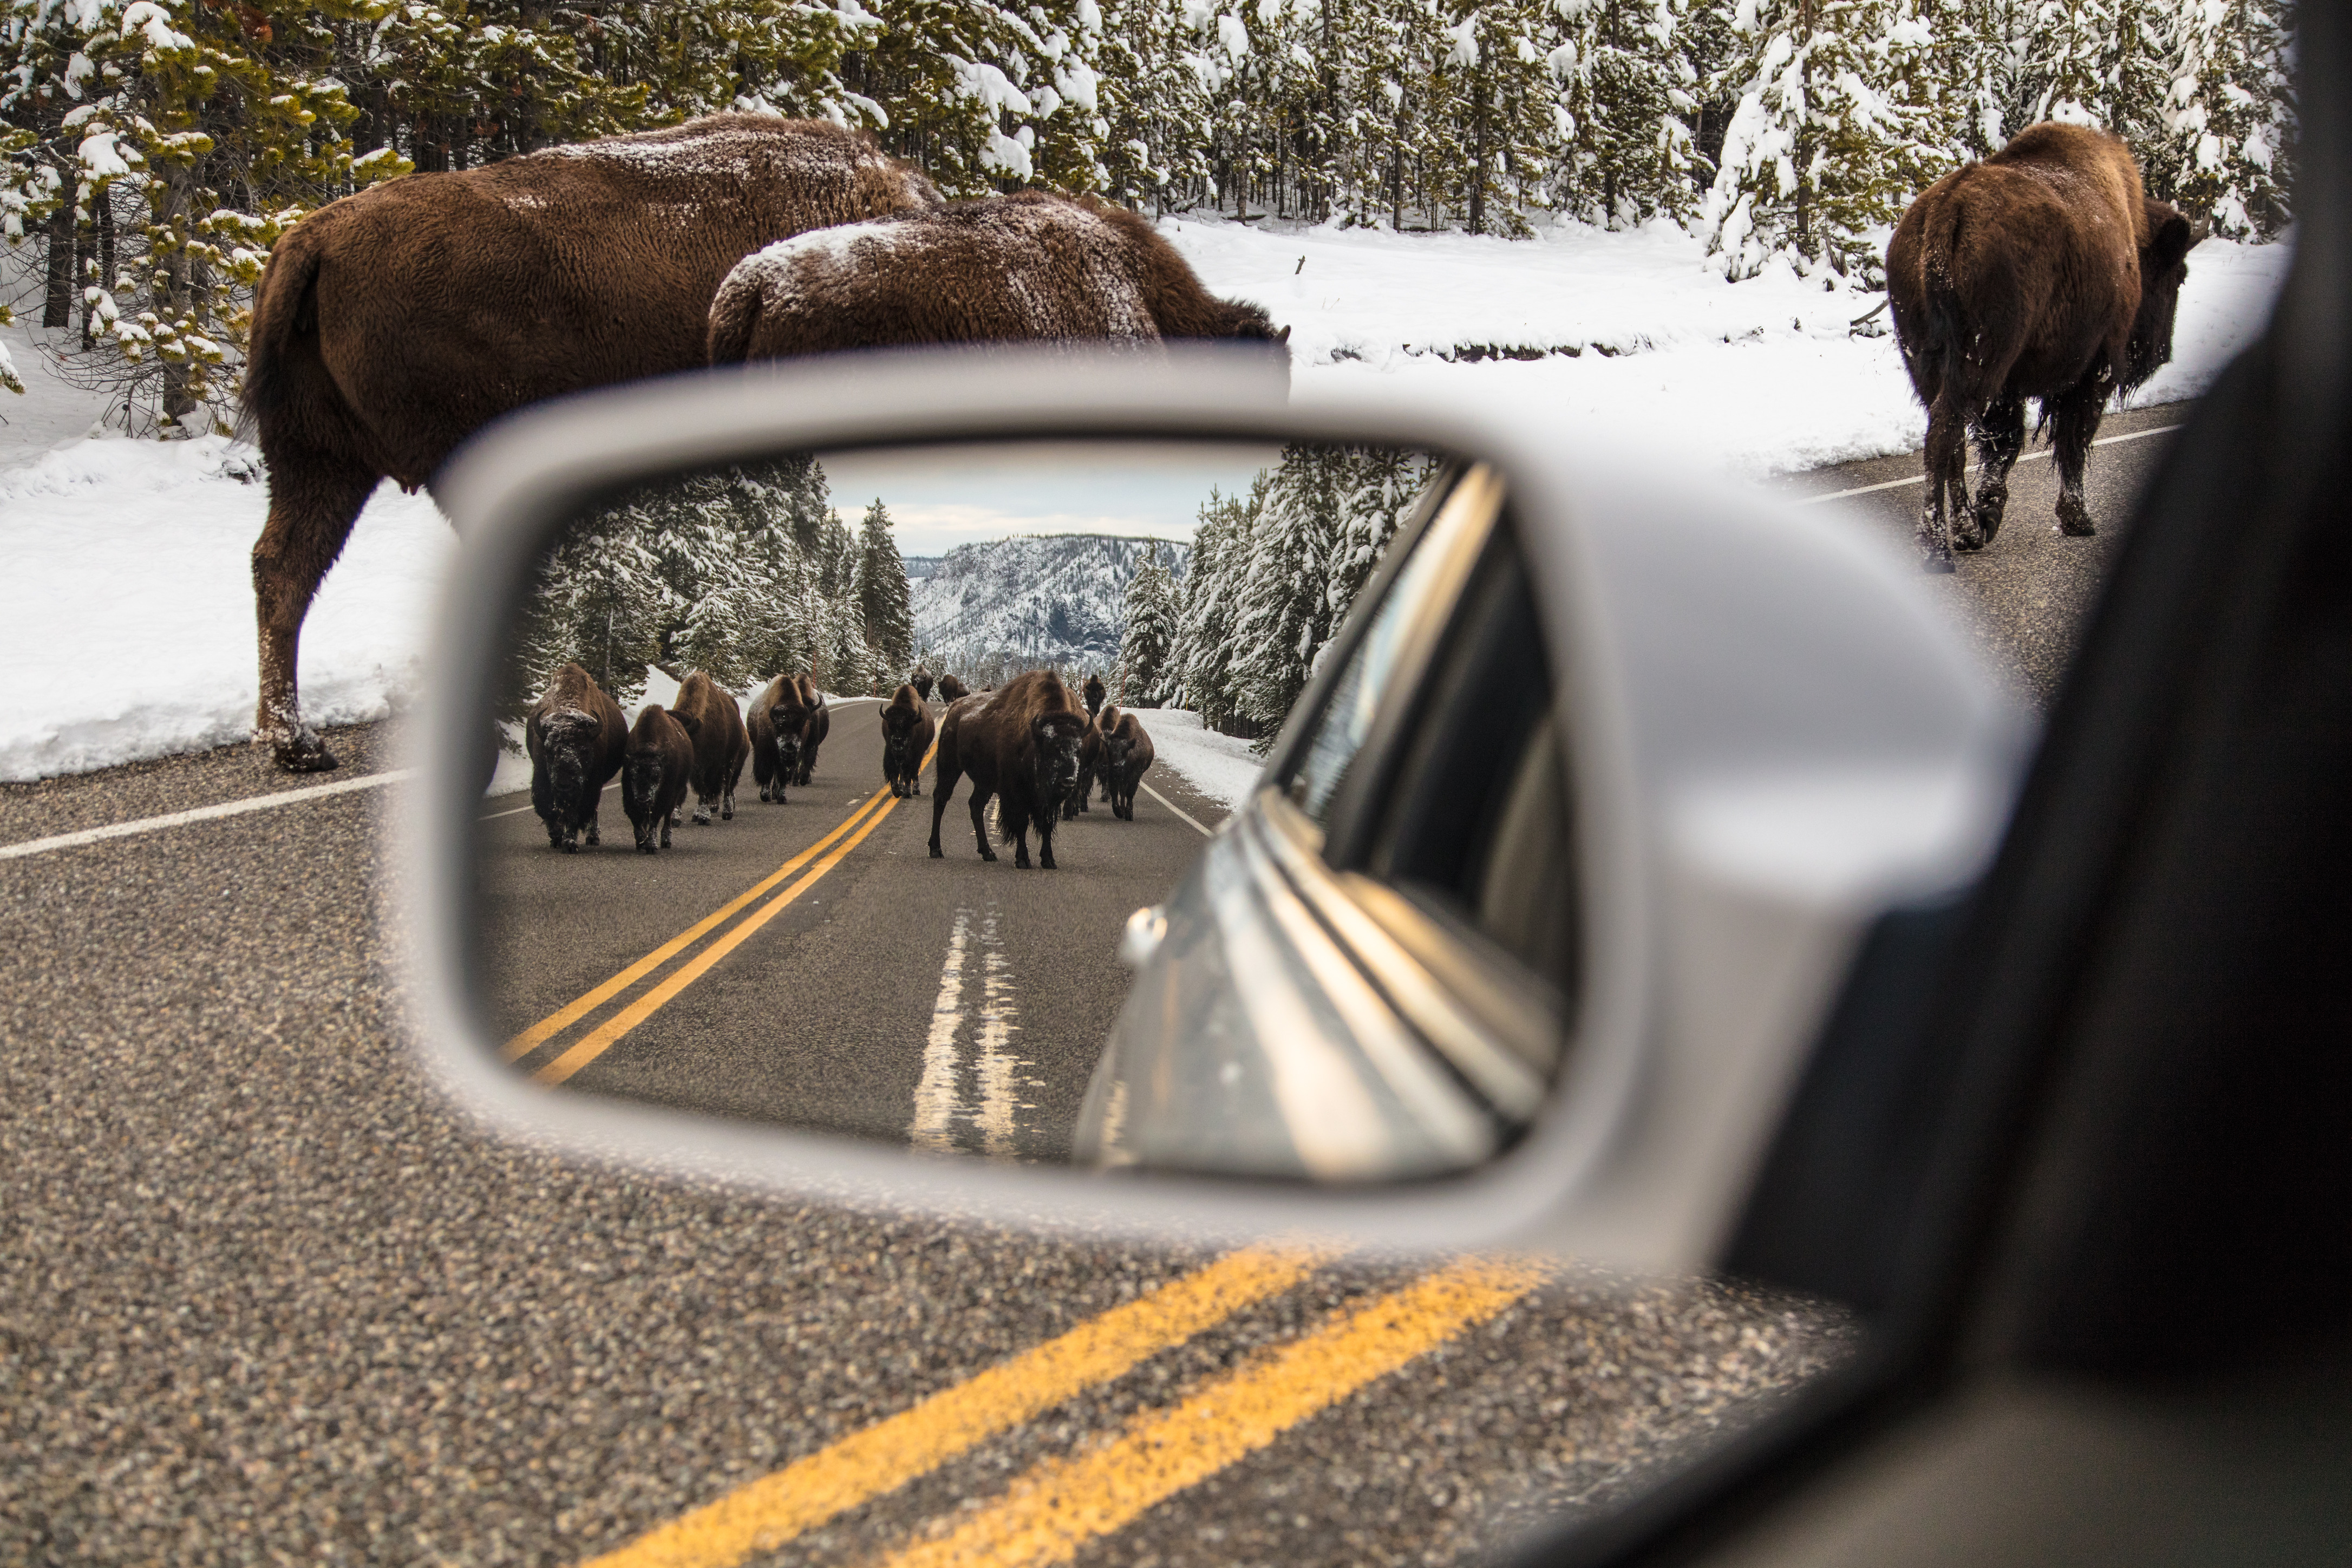 Looking into a rear view mirror at a herd of bison standing in the middle of the road